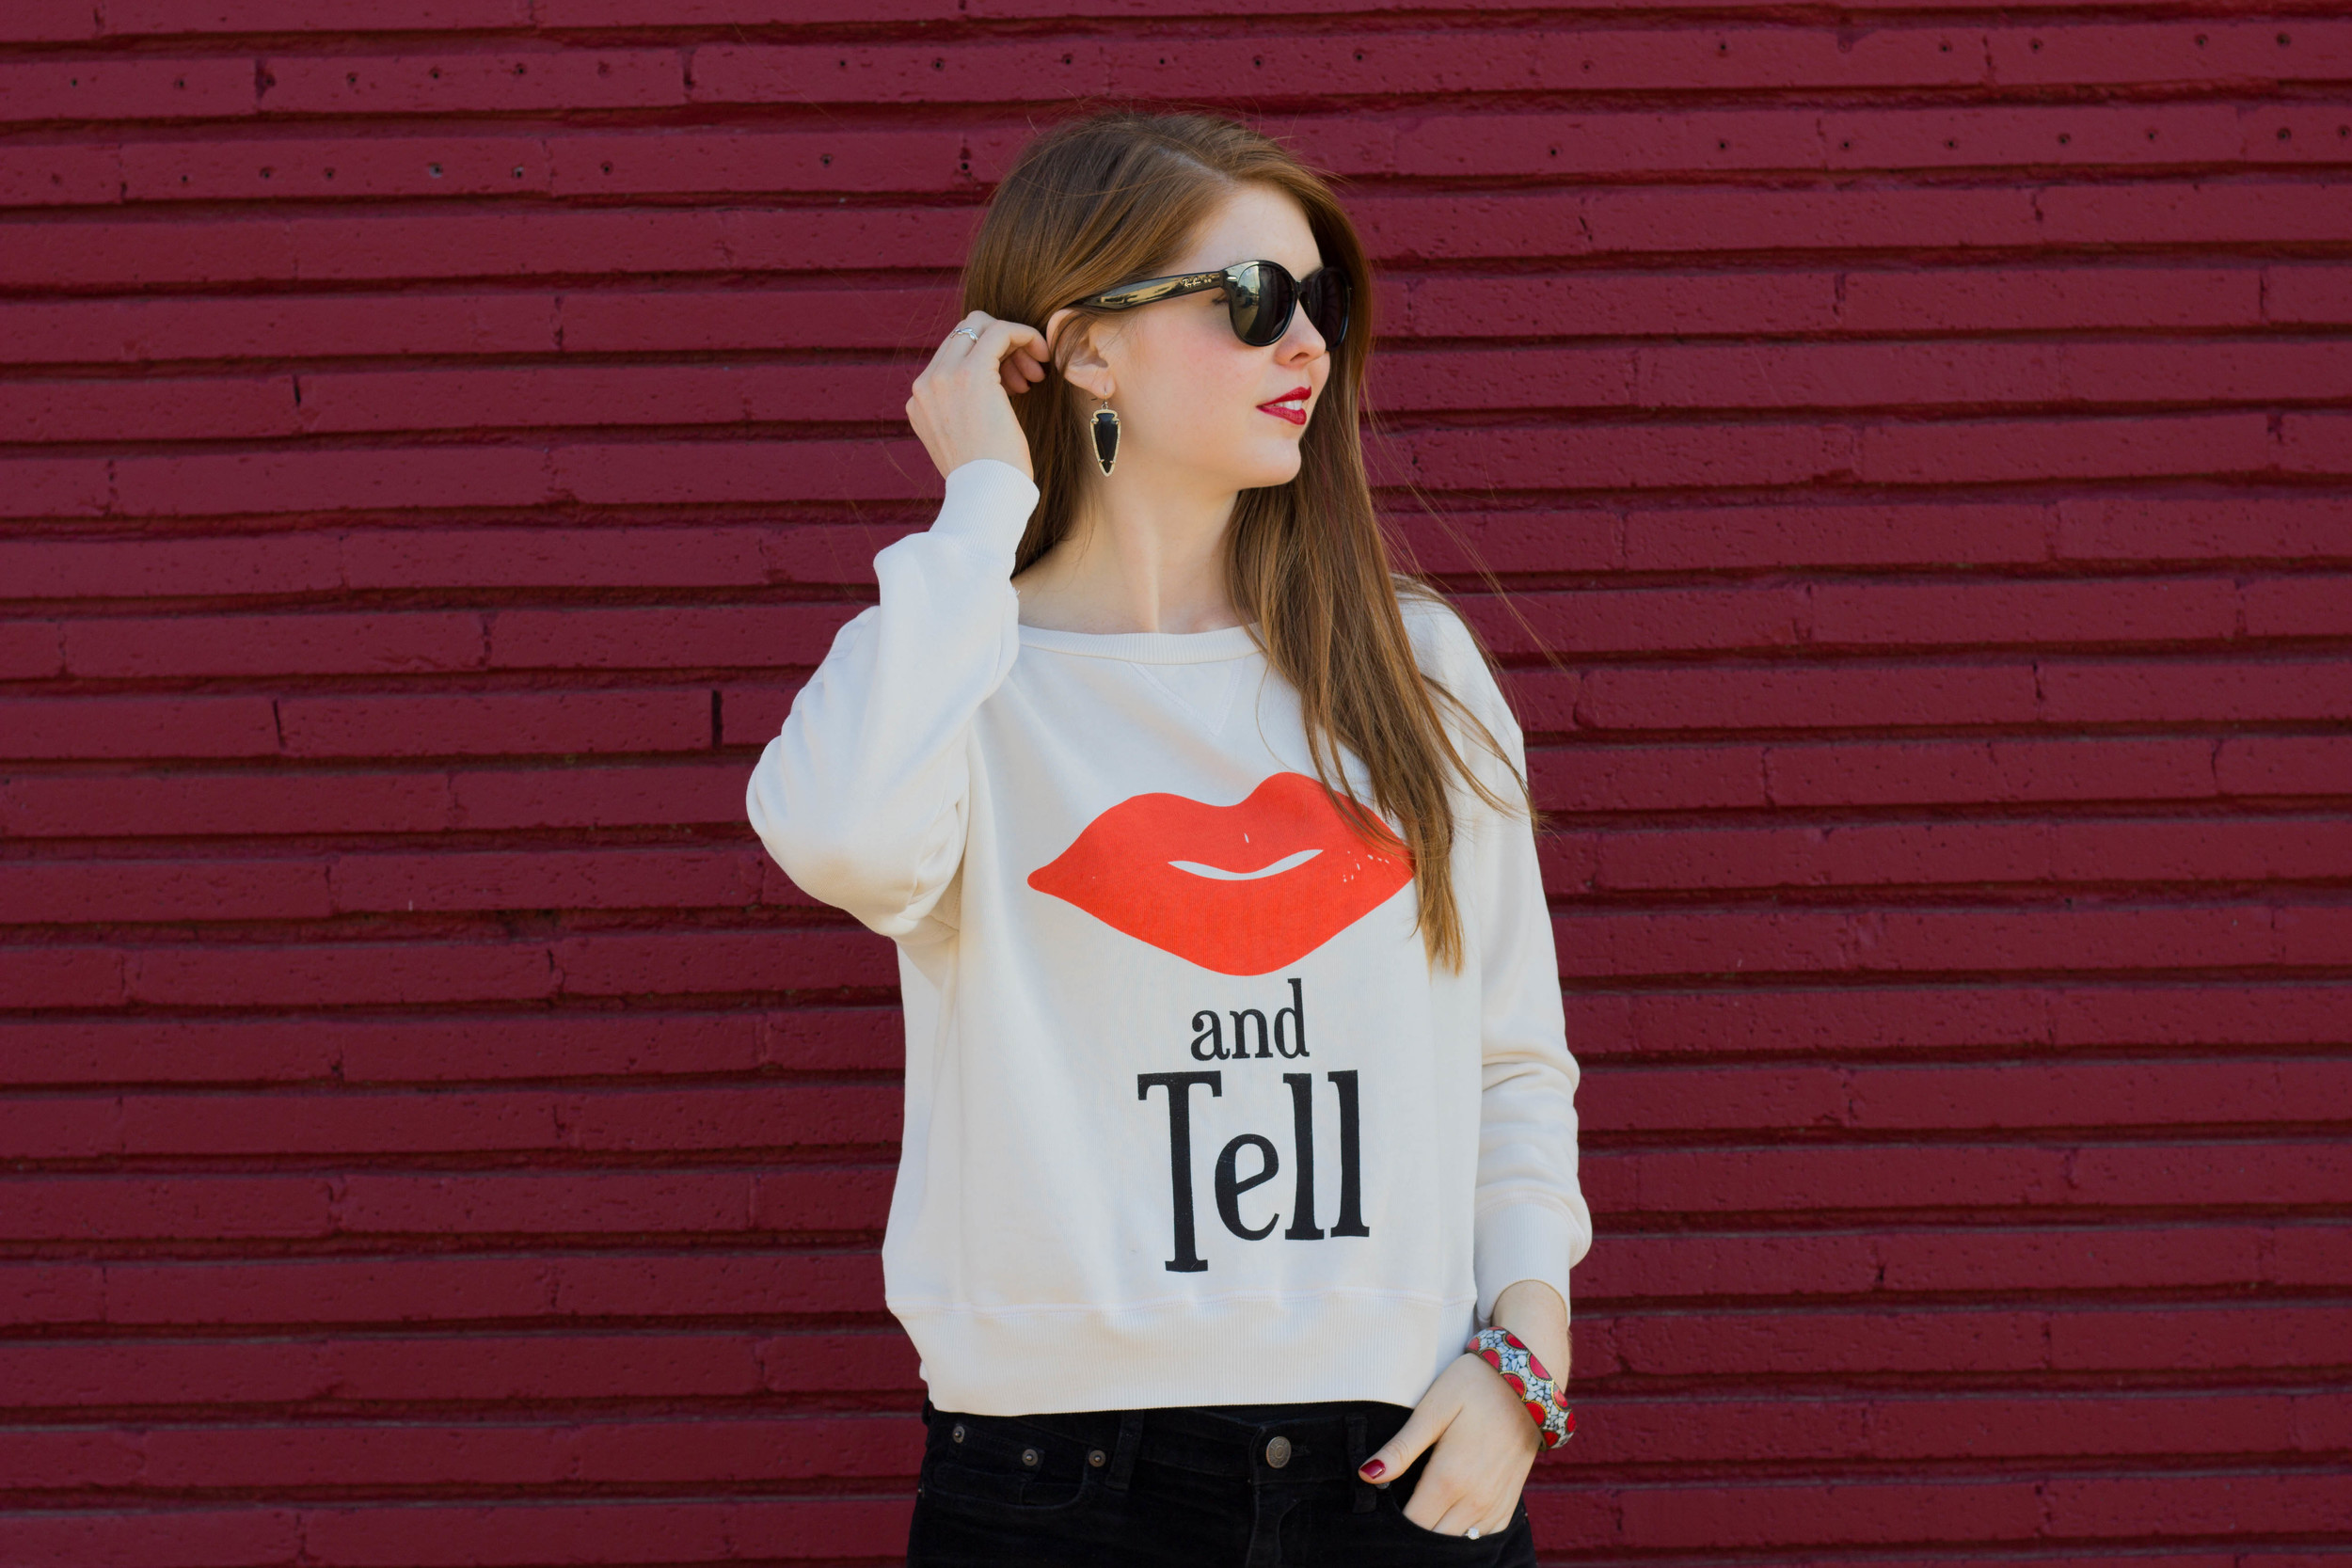 wildfox kiss and tell crew, chinese laundry over the knee boots, kendra scott earrings, rayban sunglasses